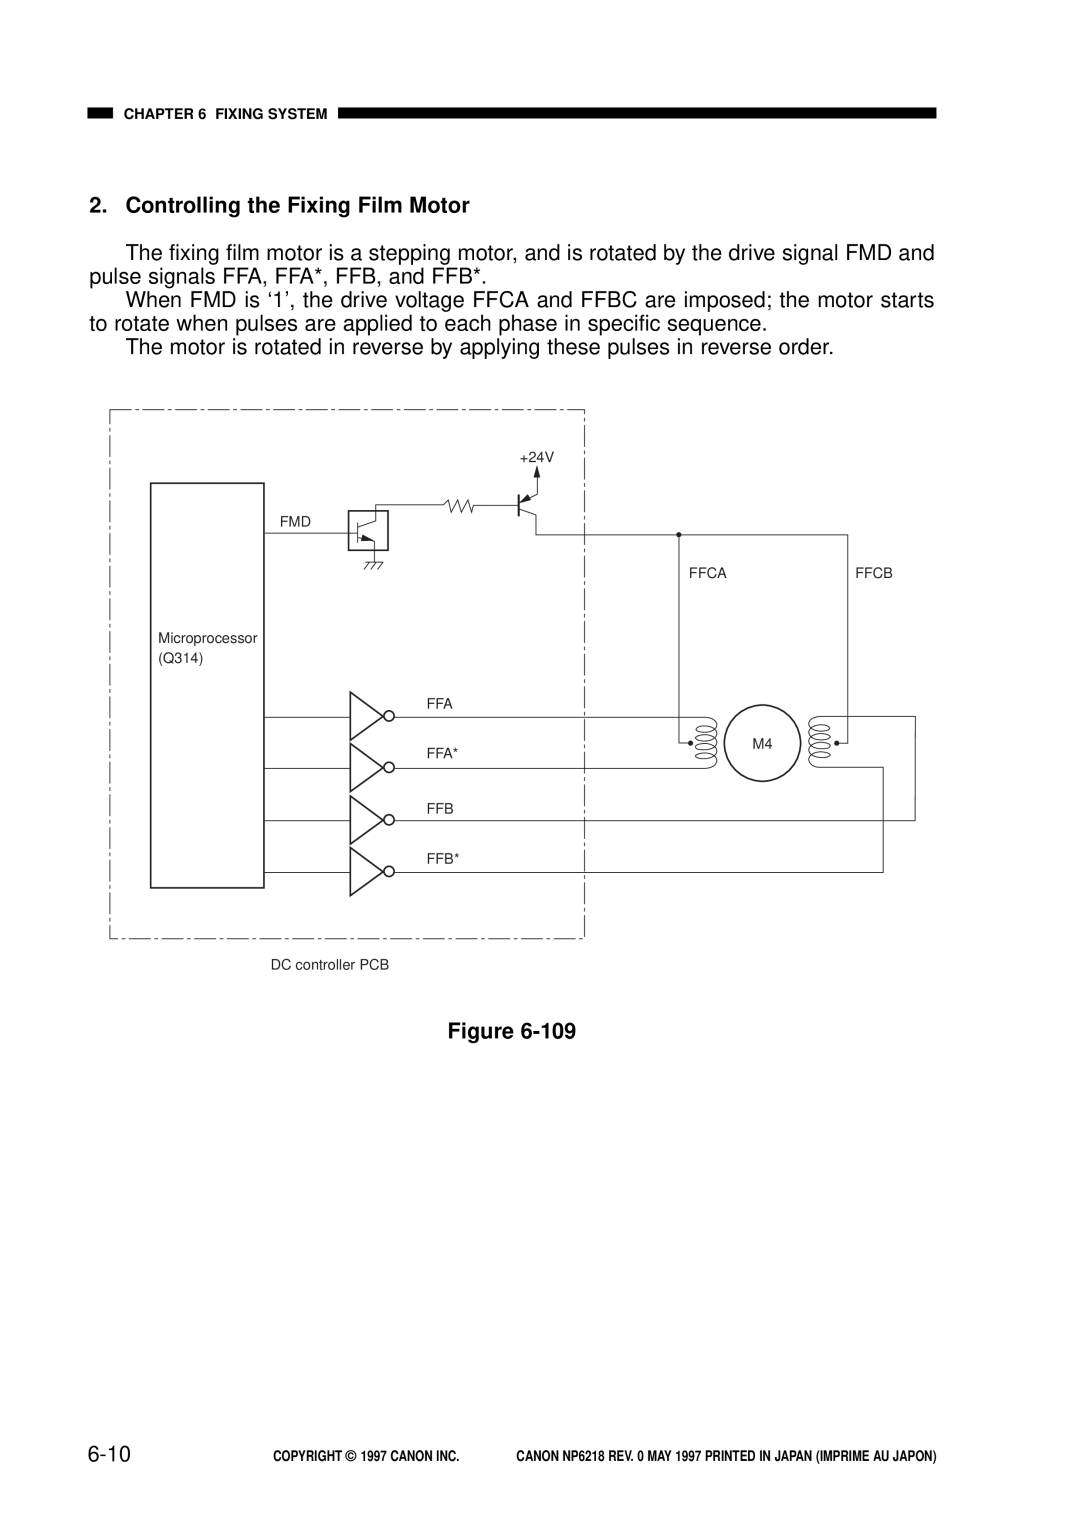 Canon NP6218, FY8-13EX-000 service manual Controlling the Fixing Film Motor, 6-10 